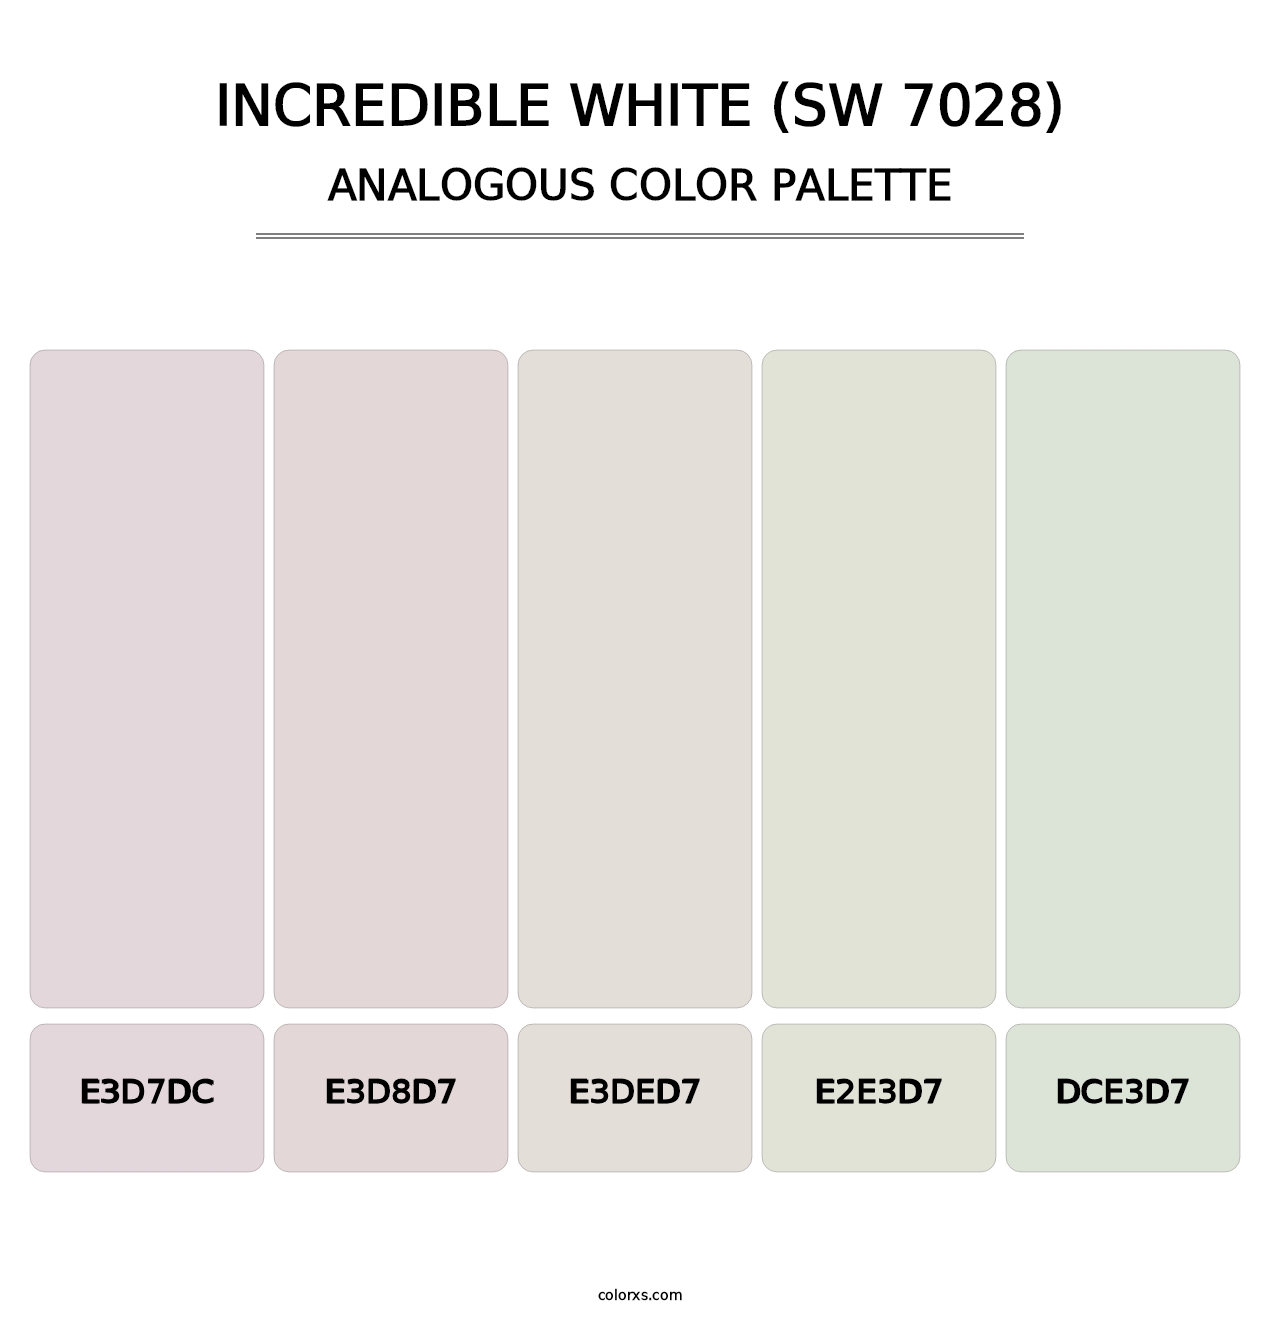 Incredible White (SW 7028) - Analogous Color Palette